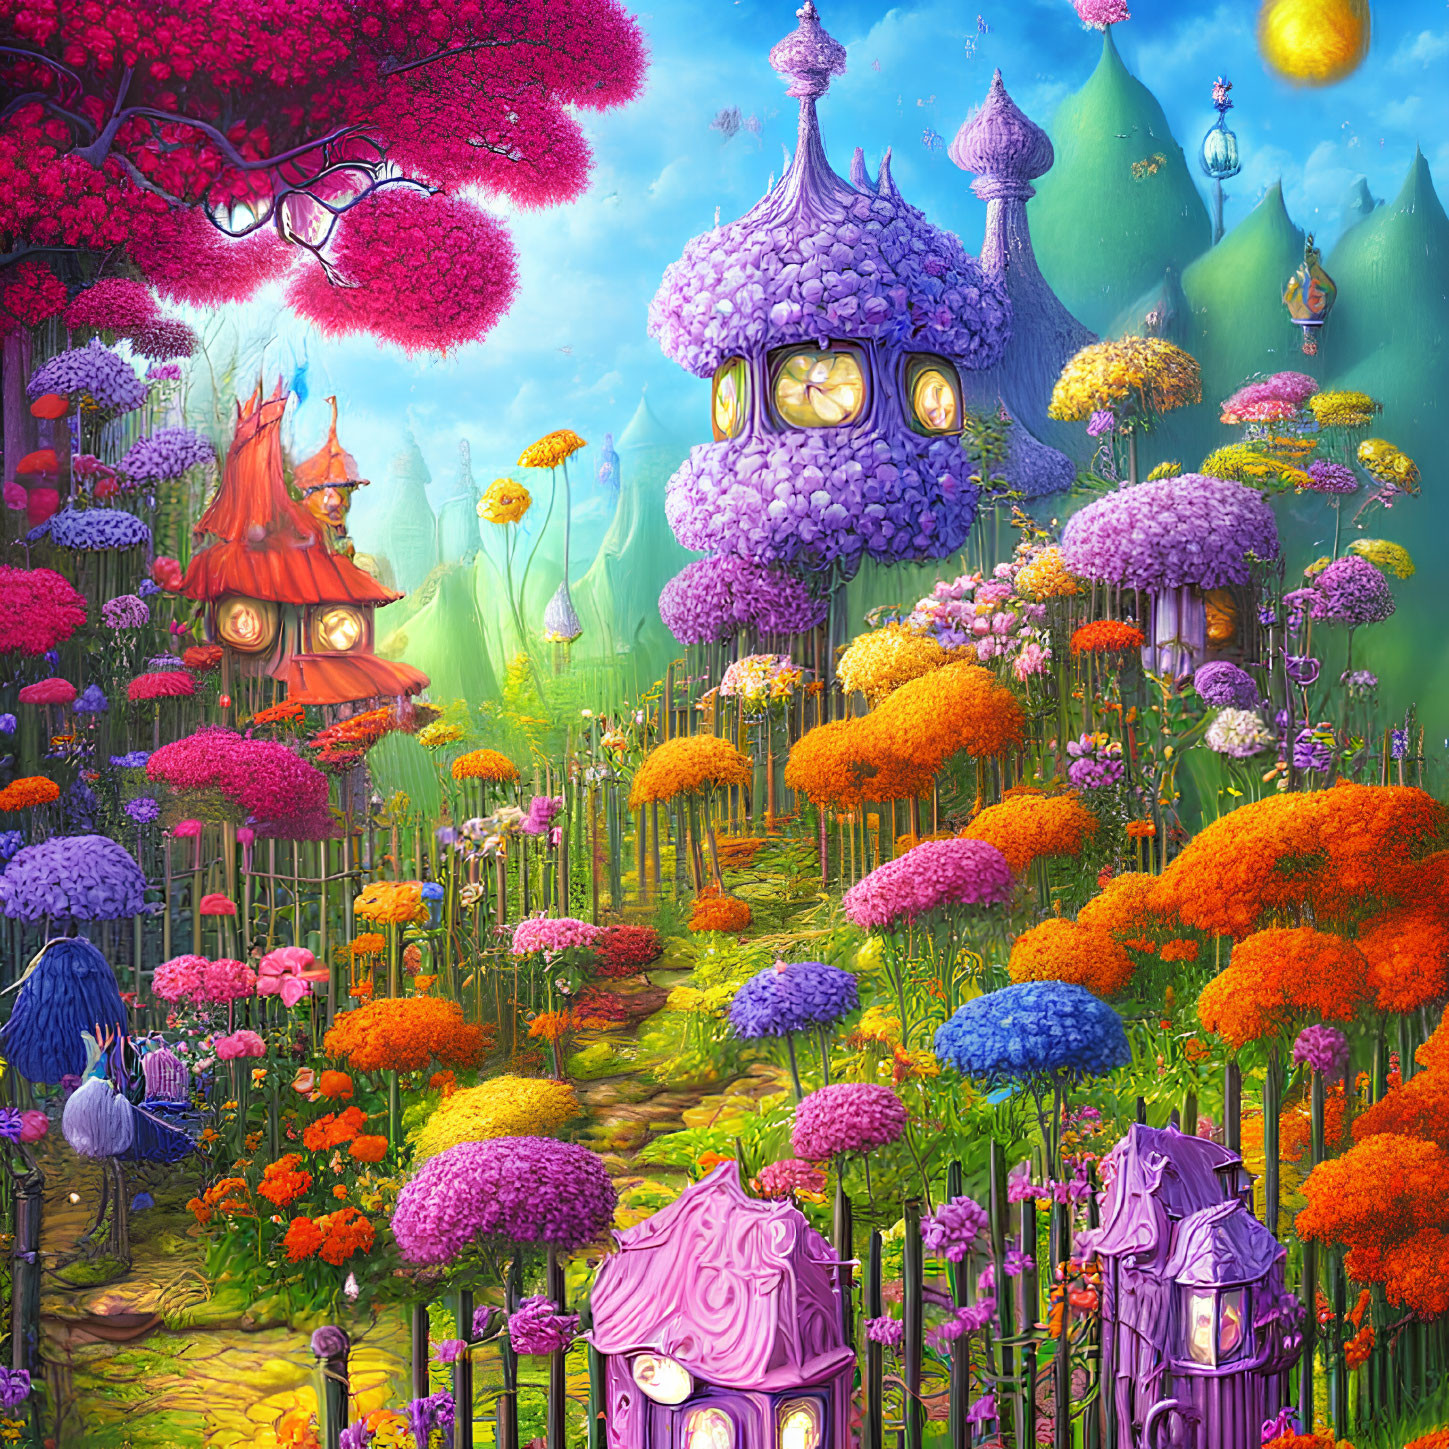 Fantastical garden with whimsical structures and colorful flora